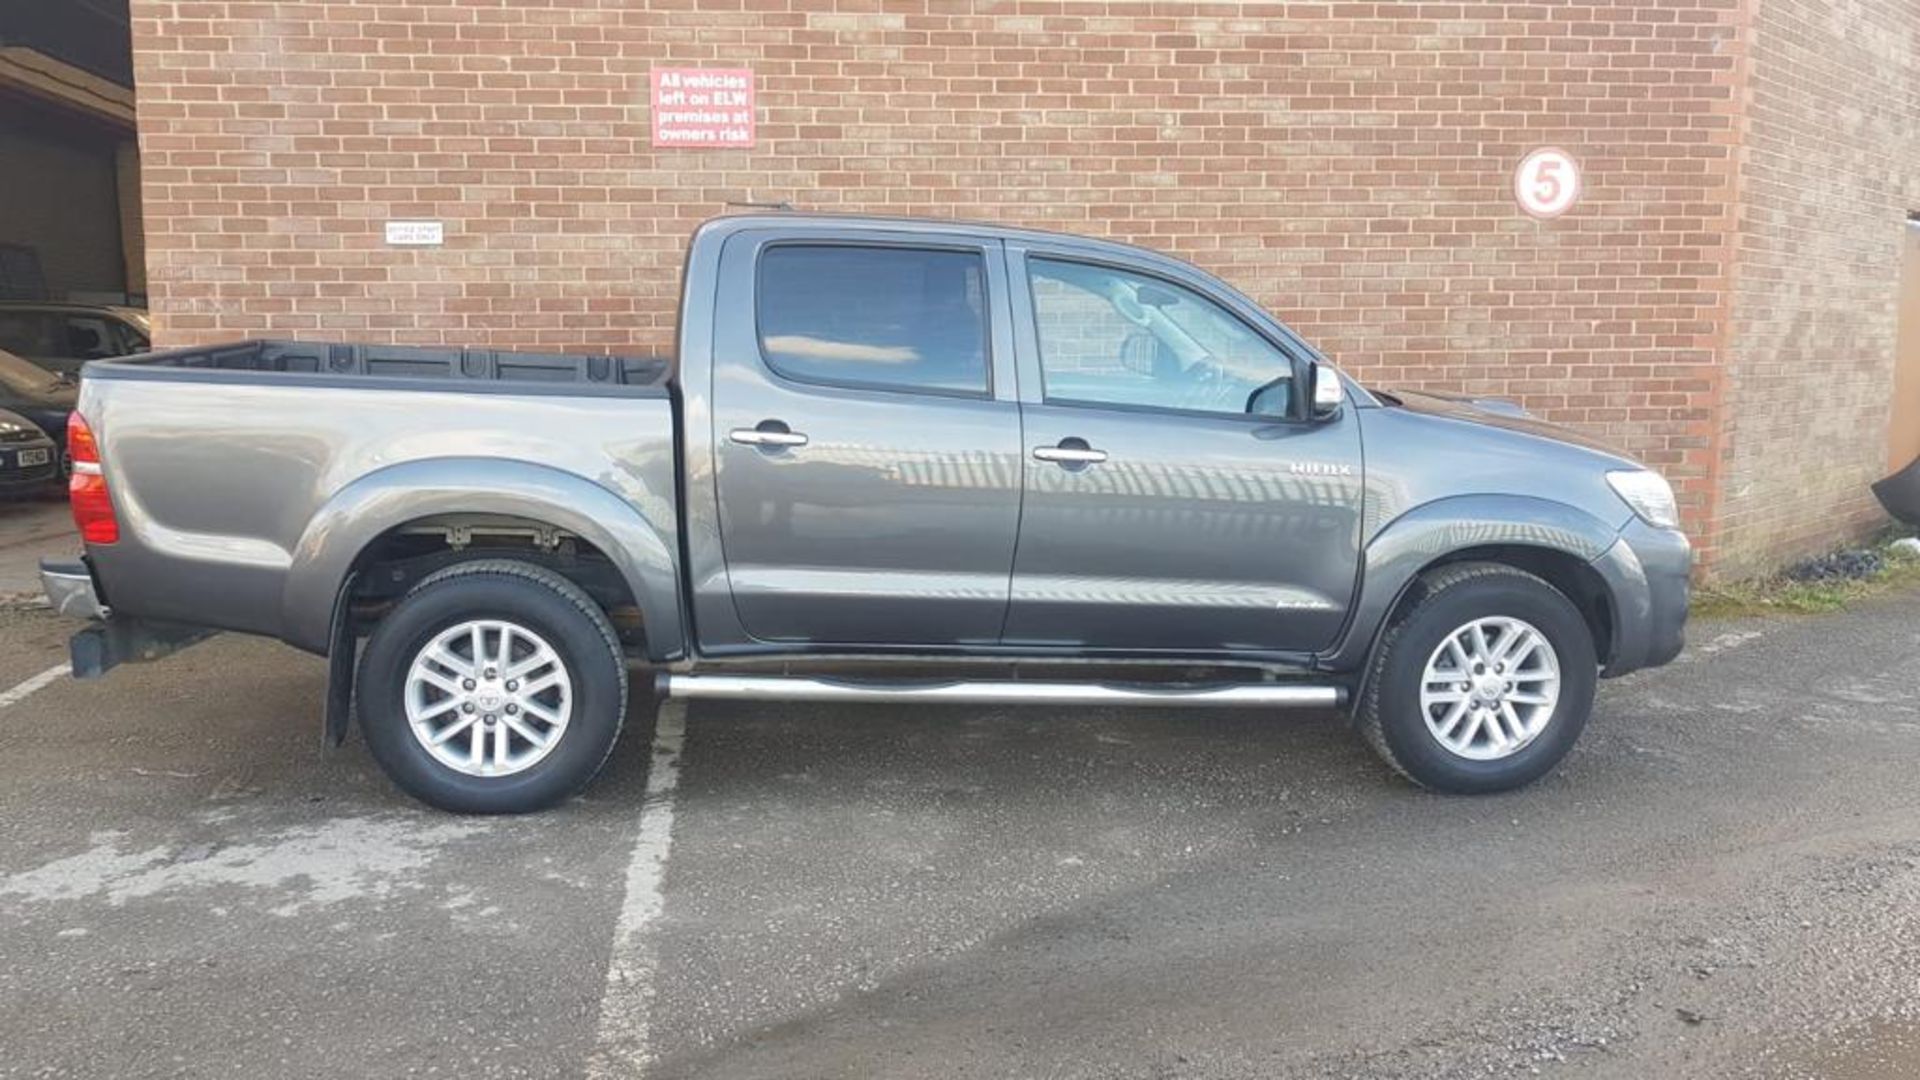 2015/64 REG TOYOTA HILUX INVINCIBLE D-4D 4X4 GREY DIESEL LIGHT UTILITY, SHOWING 1 FORMER KEEPER - Image 3 of 22